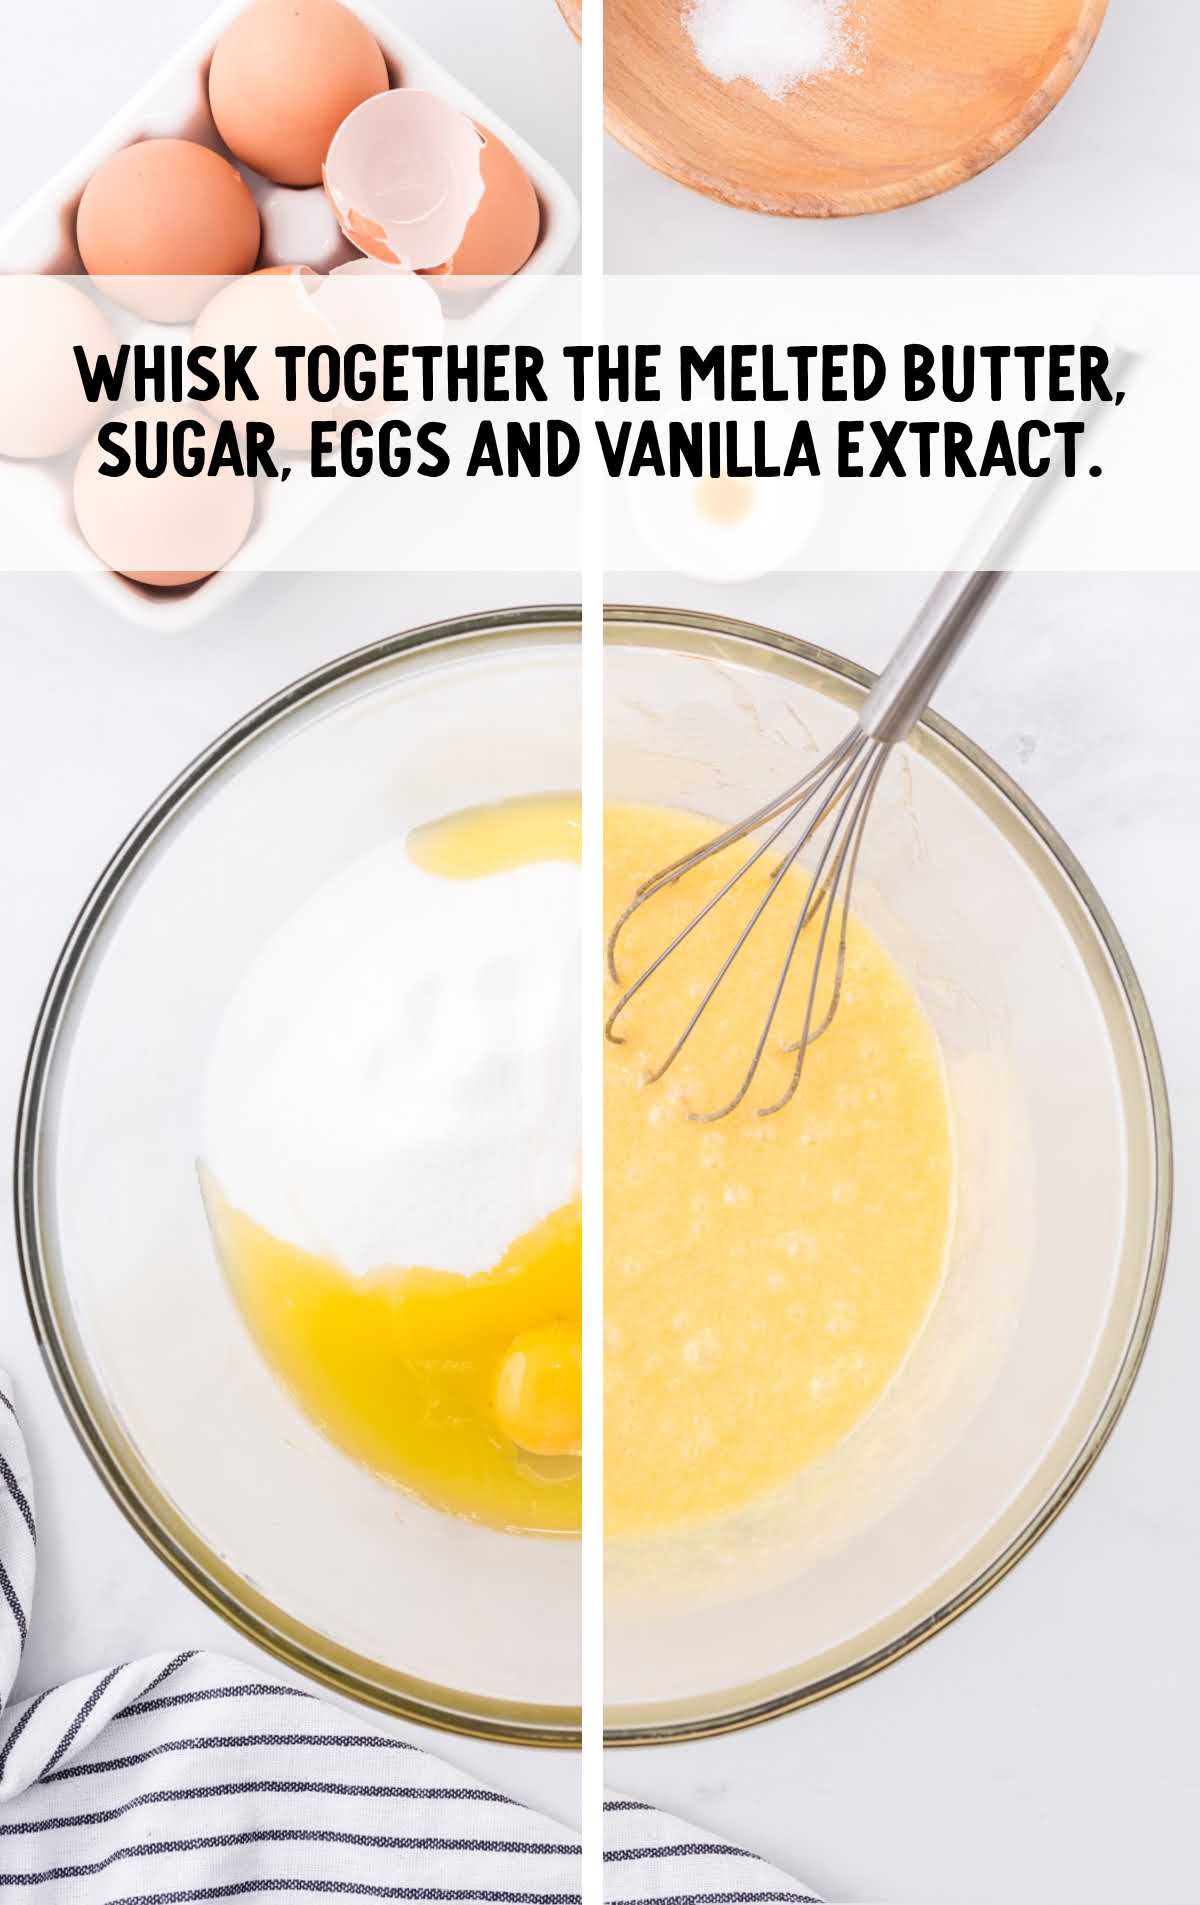 melted butter, sugar, eggs, and vanilla whisked together in a bowl